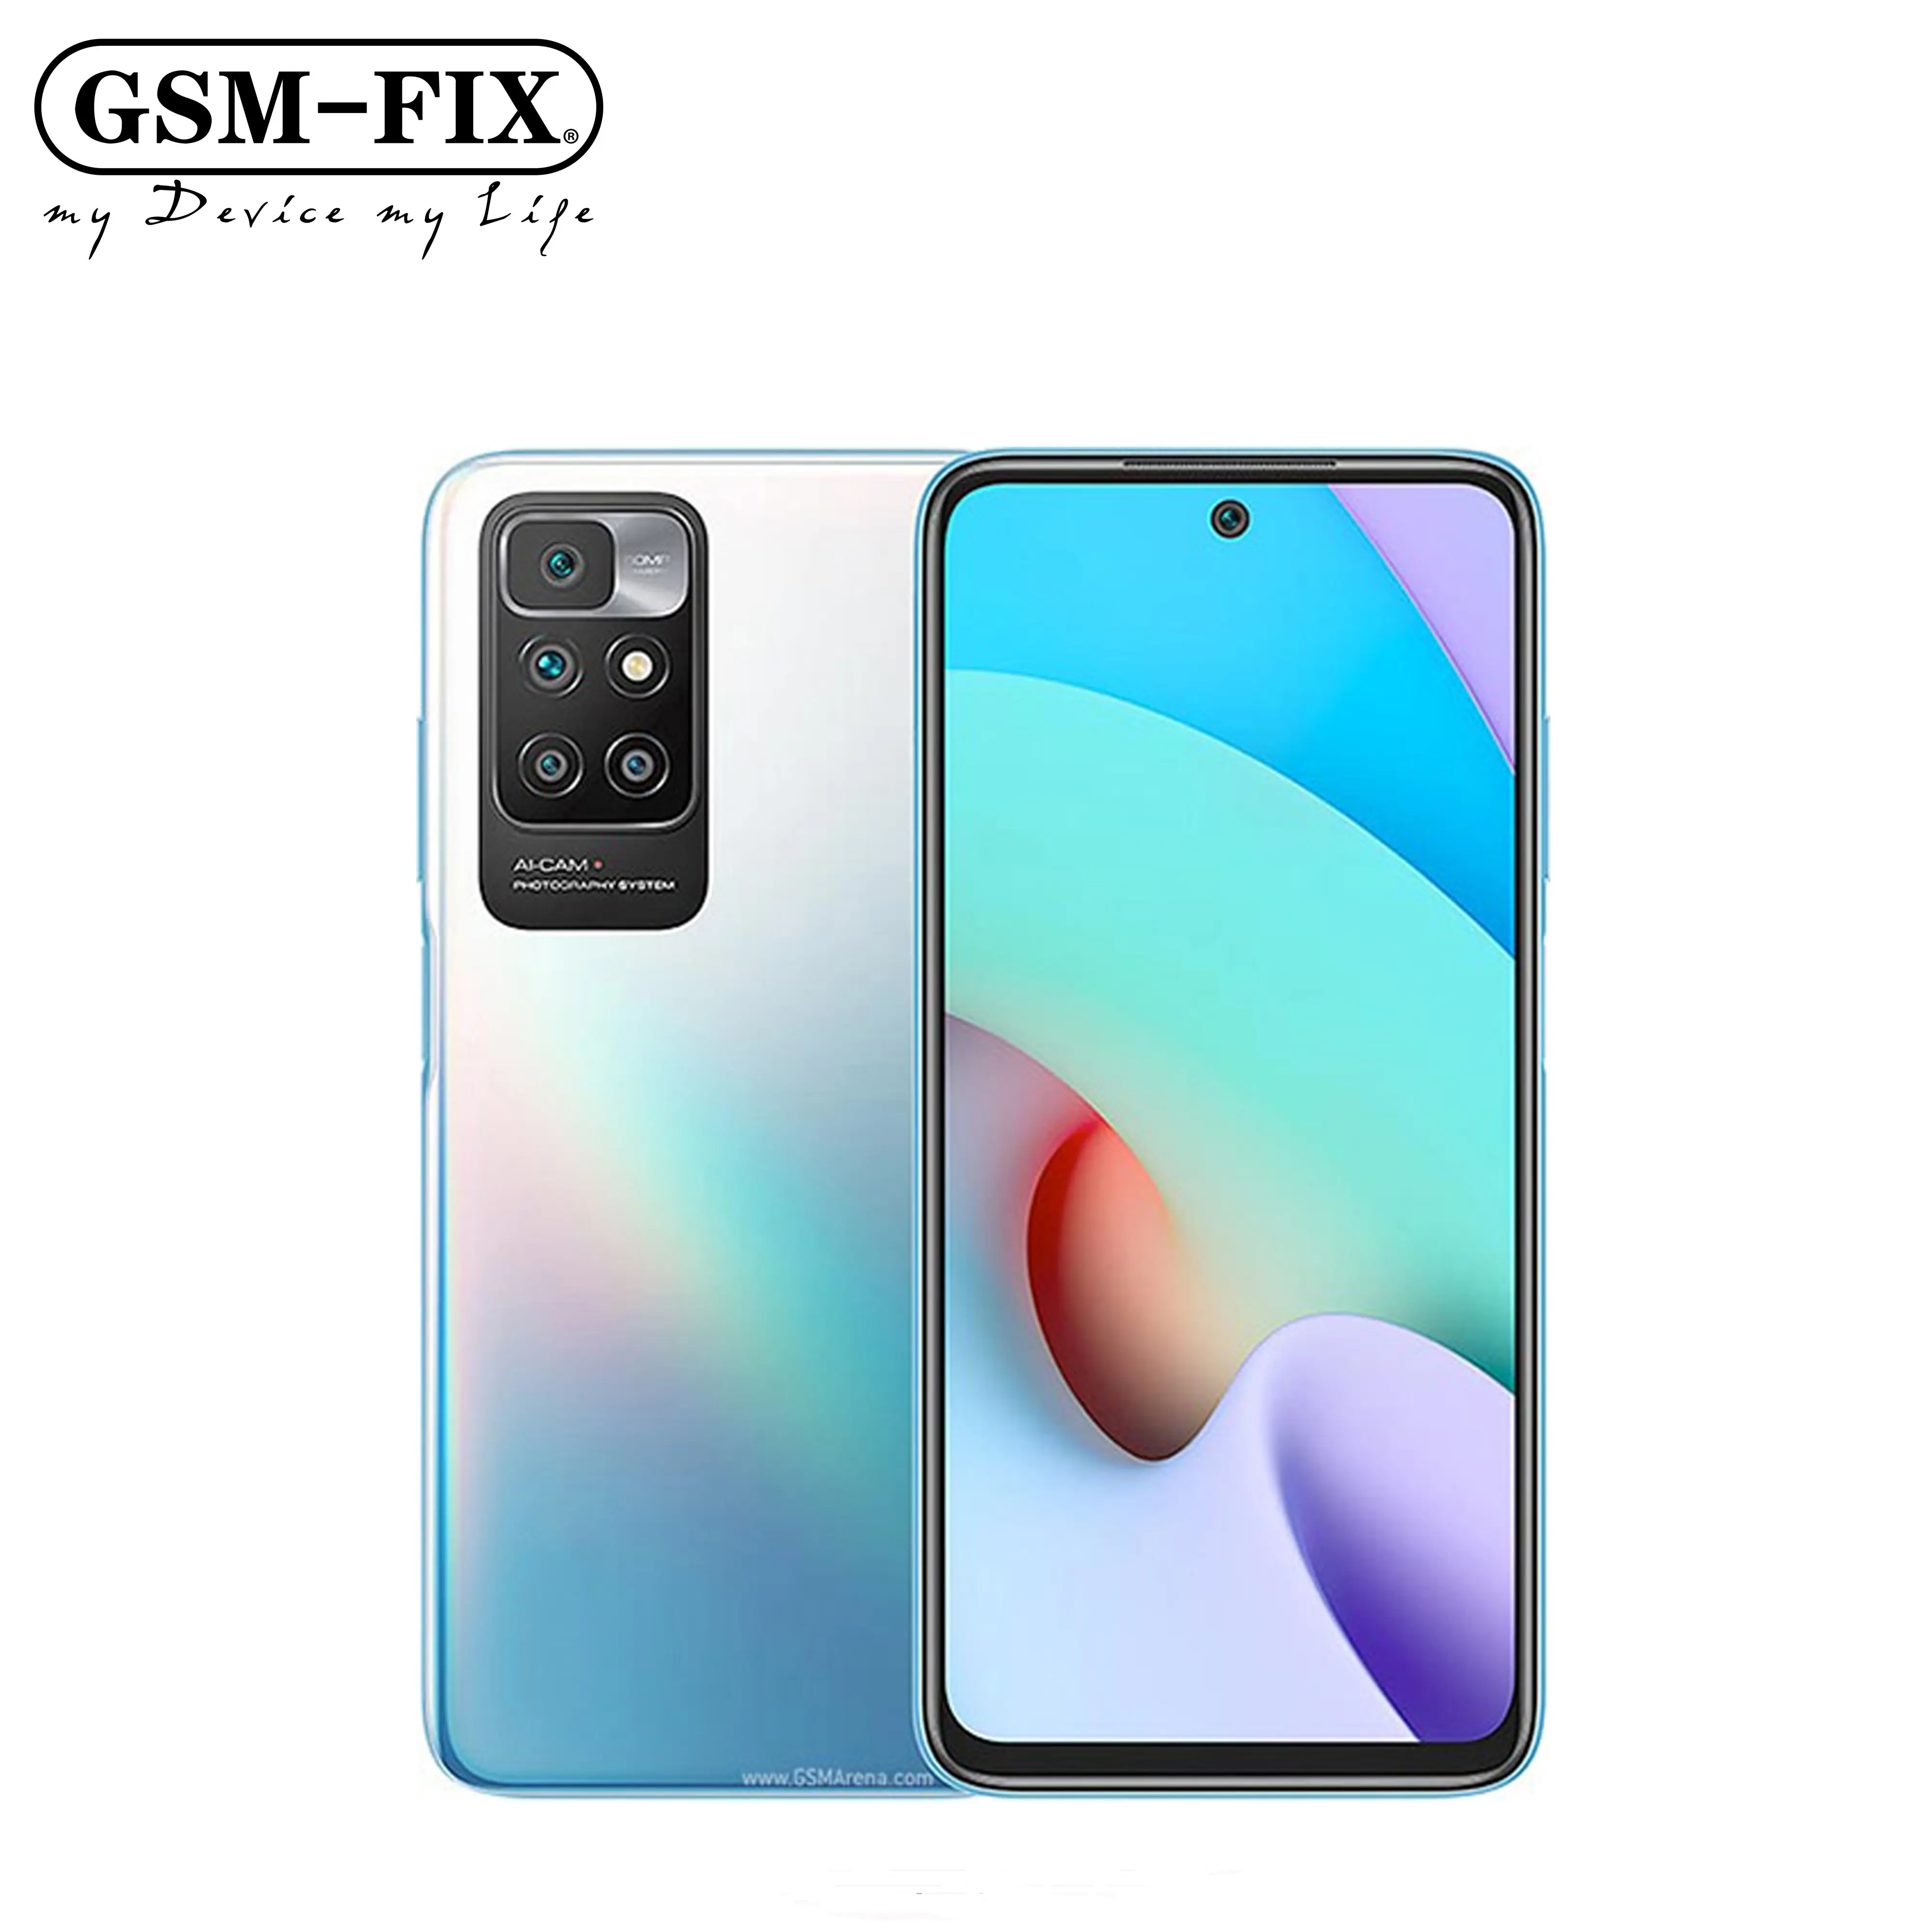 GSM-FIX Global Version For Xiaomi Mi 10 5g S865 6.67" Amoled 90hz 108mp Camera 4500mah 50w Fast Charging Mobile Phone